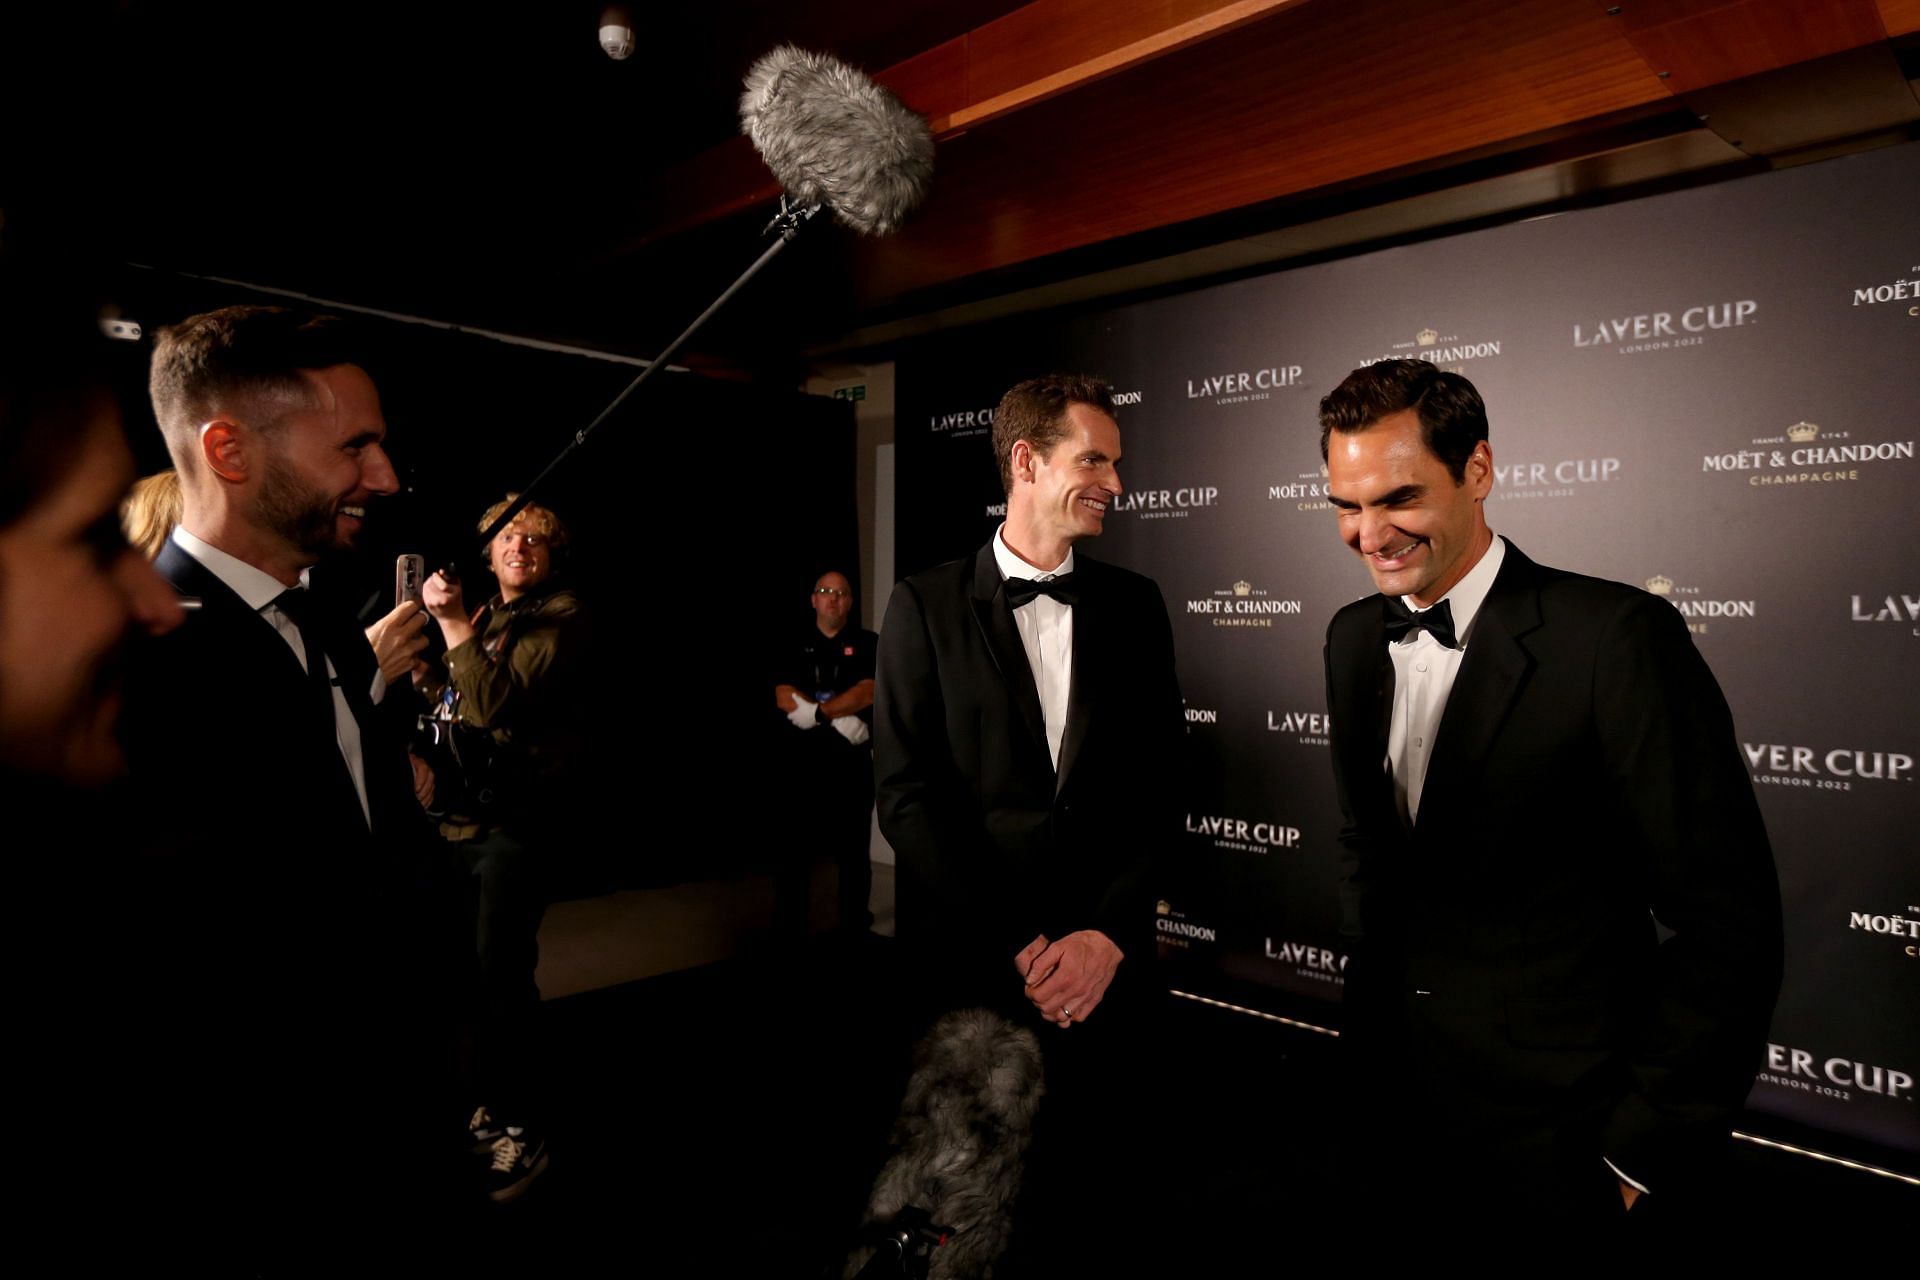 Andy Murray and Roger Federer are interviewed during the Laver Cup gala dinner.